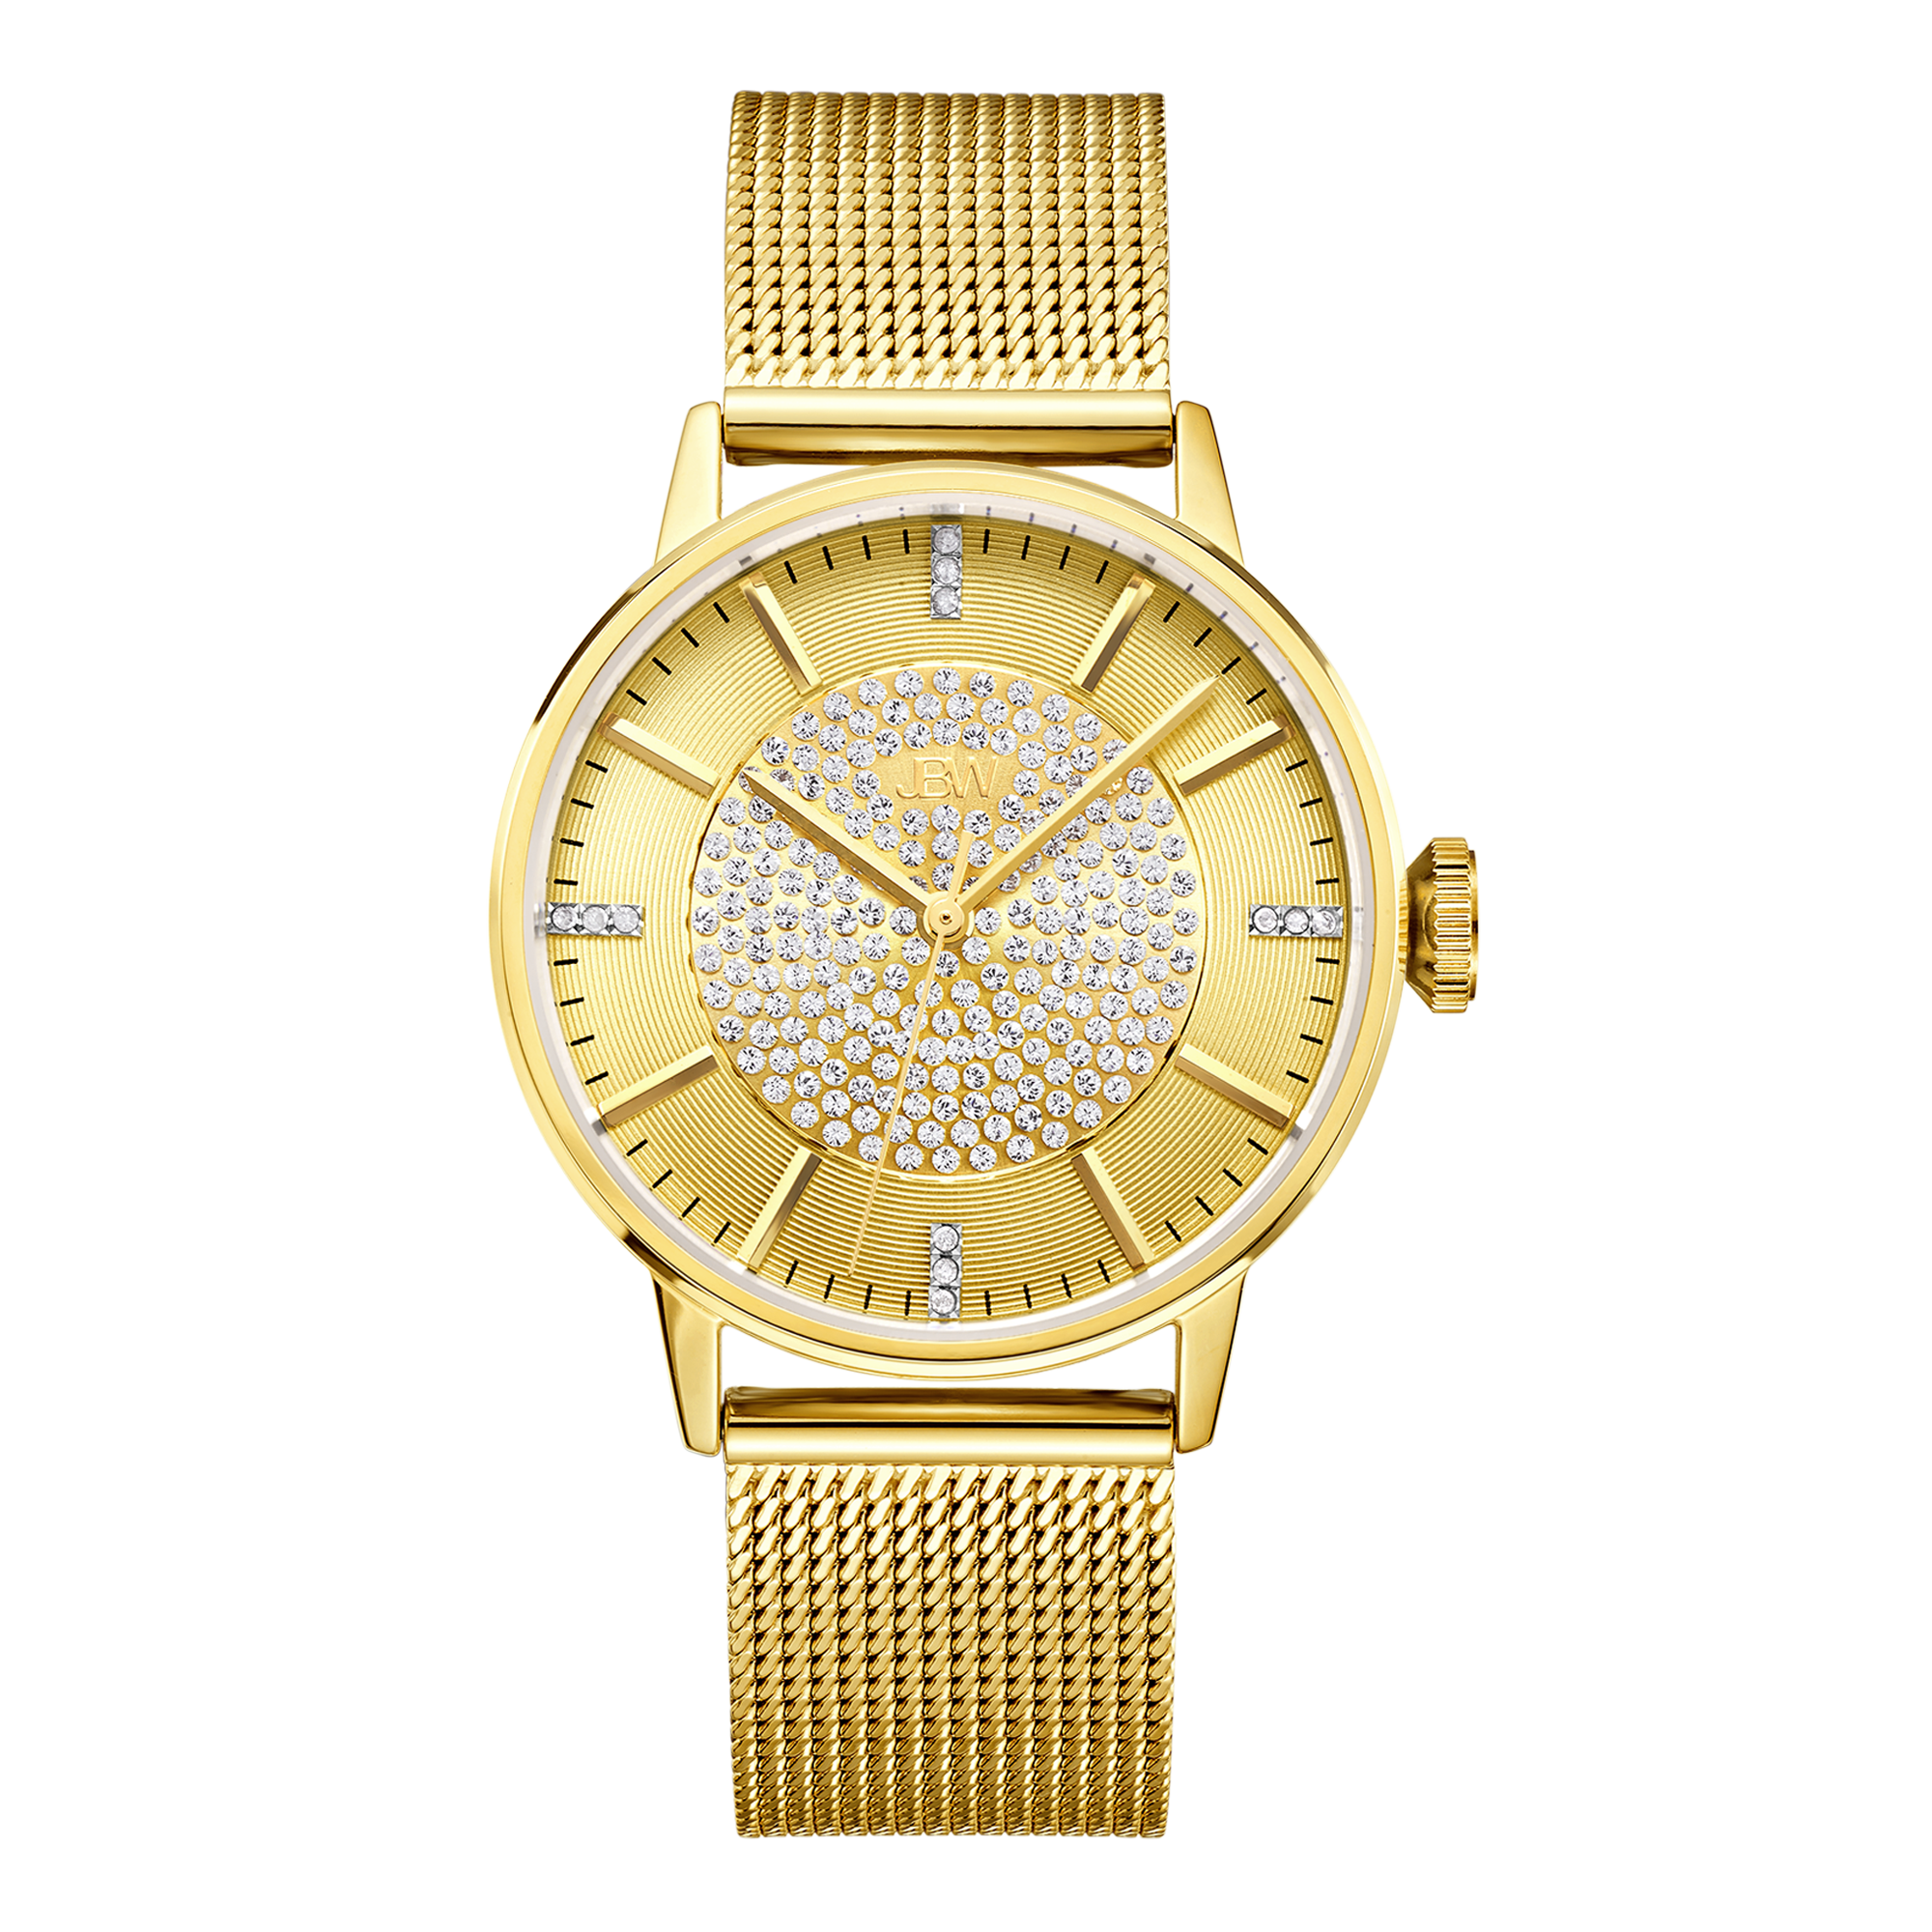 Jbw women s j. See clipart expensive watch